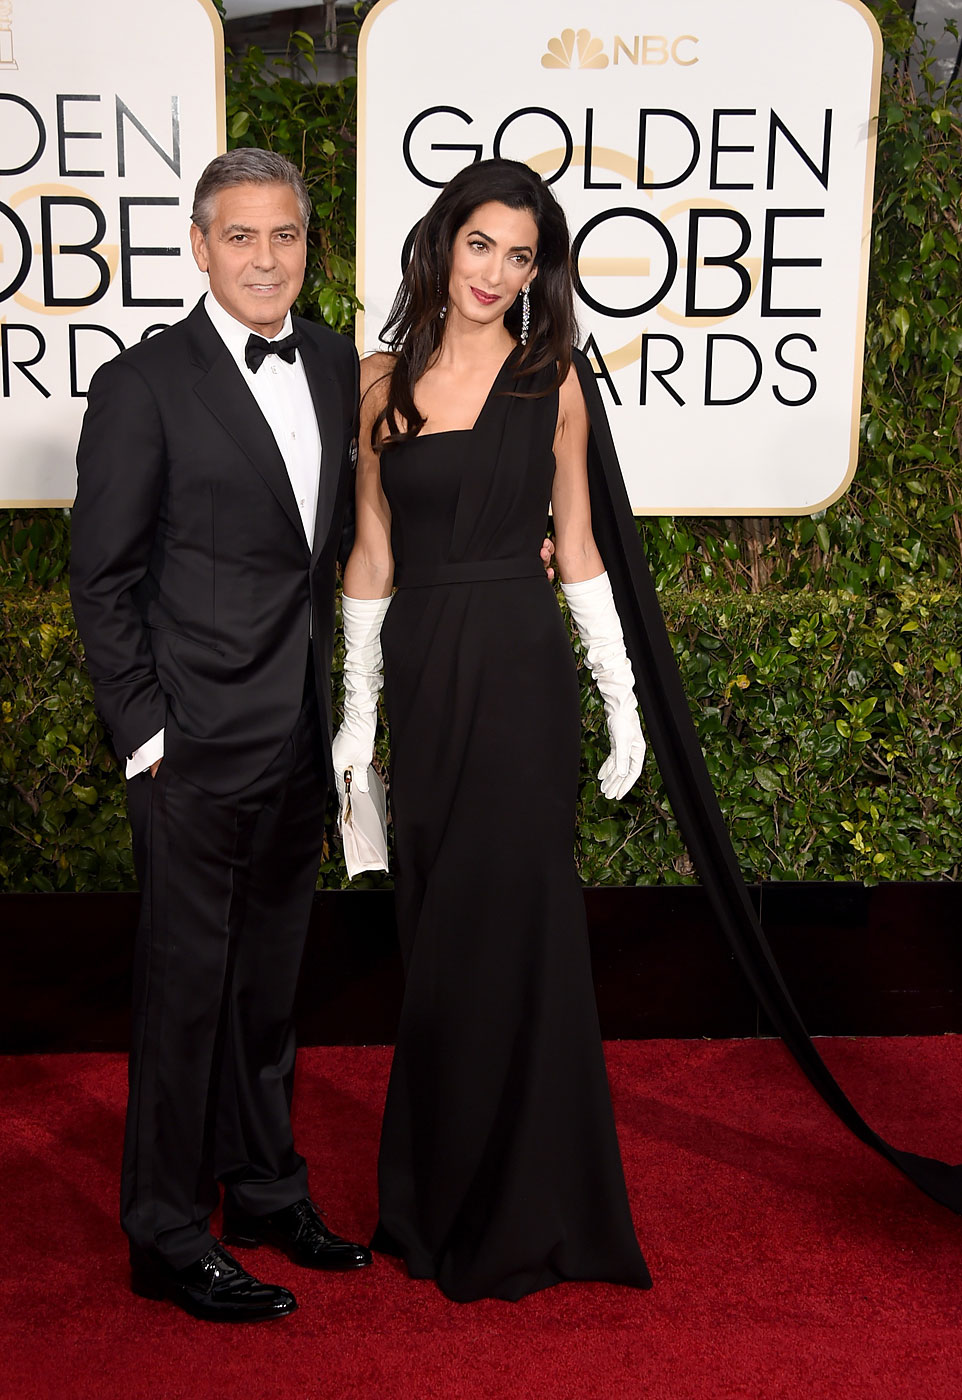 George Clooney and Amal Alamuddin Clooney attend the 72nd Annual Golden Globe Awards at The Beverly Hilton Hotel on Jan. 11, 2015 in Beverly Hills, Calif.